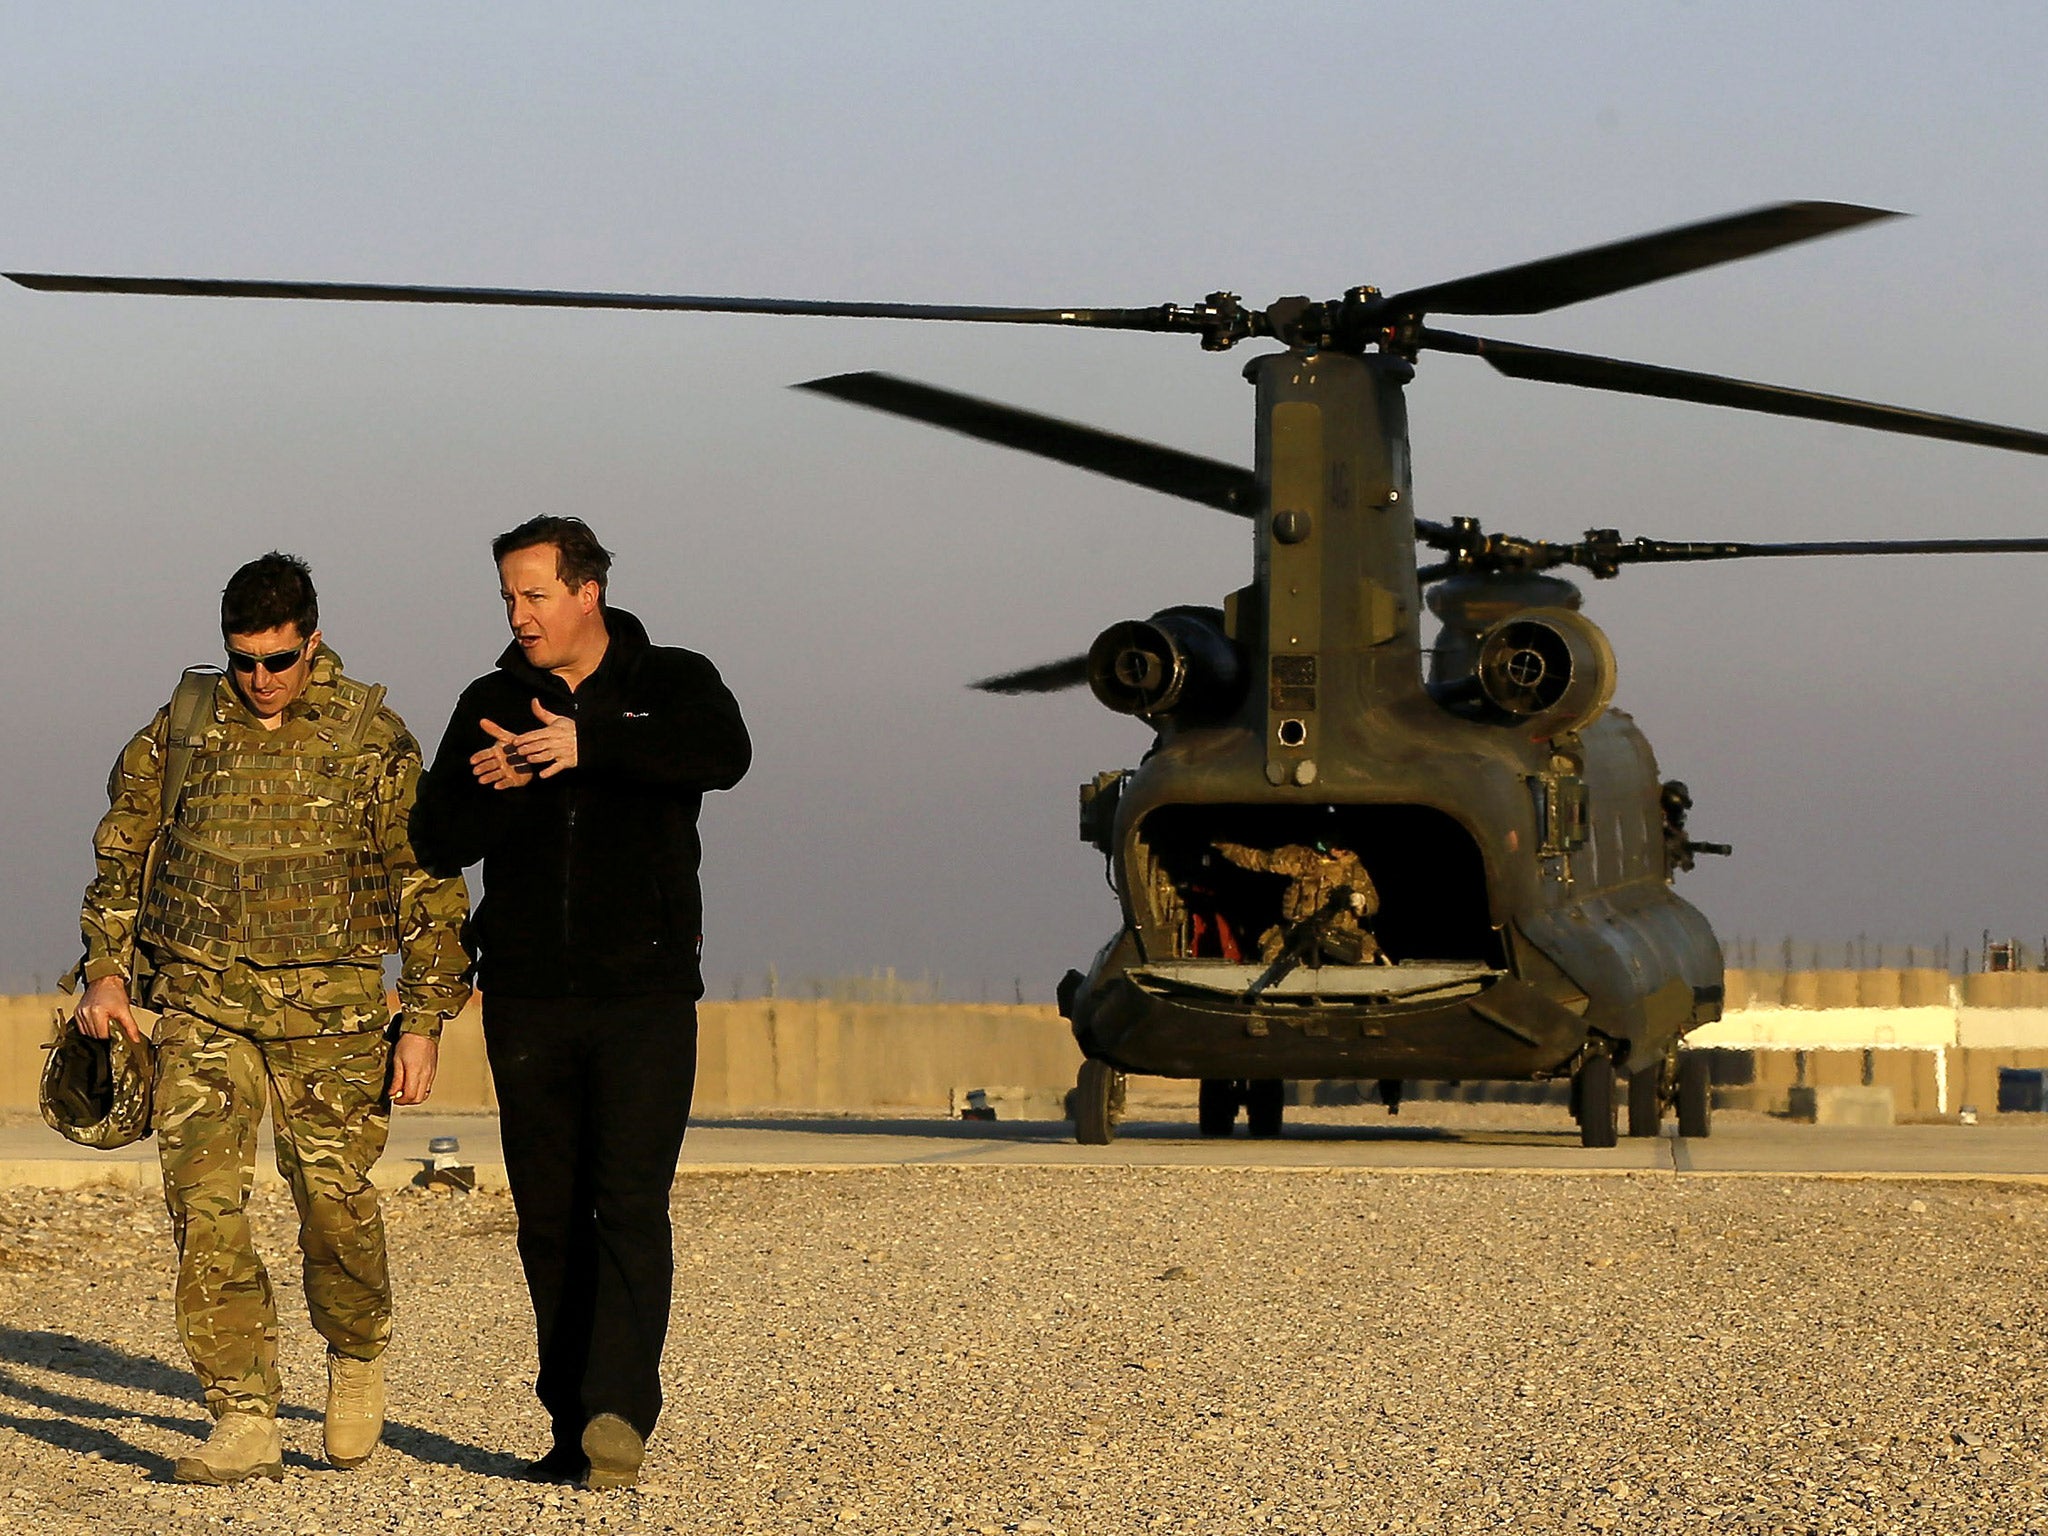 David Cameron during a visit to troops in Afghanistan last December 